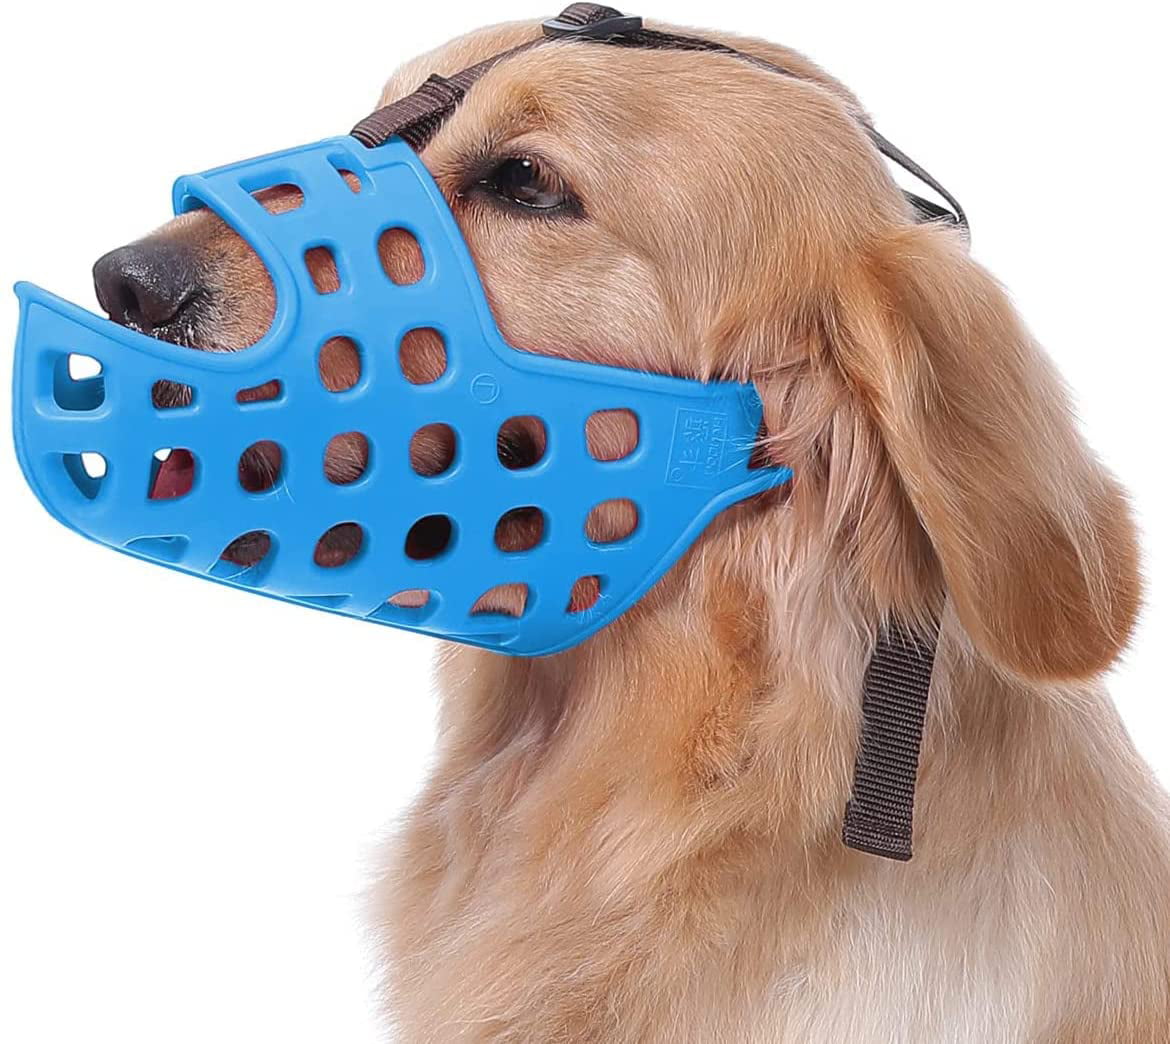 Prevents Biting Soft Basket Muzzle for Dogs Chewing and Licking Allows Panting and Drinking Mayerzon Dog Muzzle 